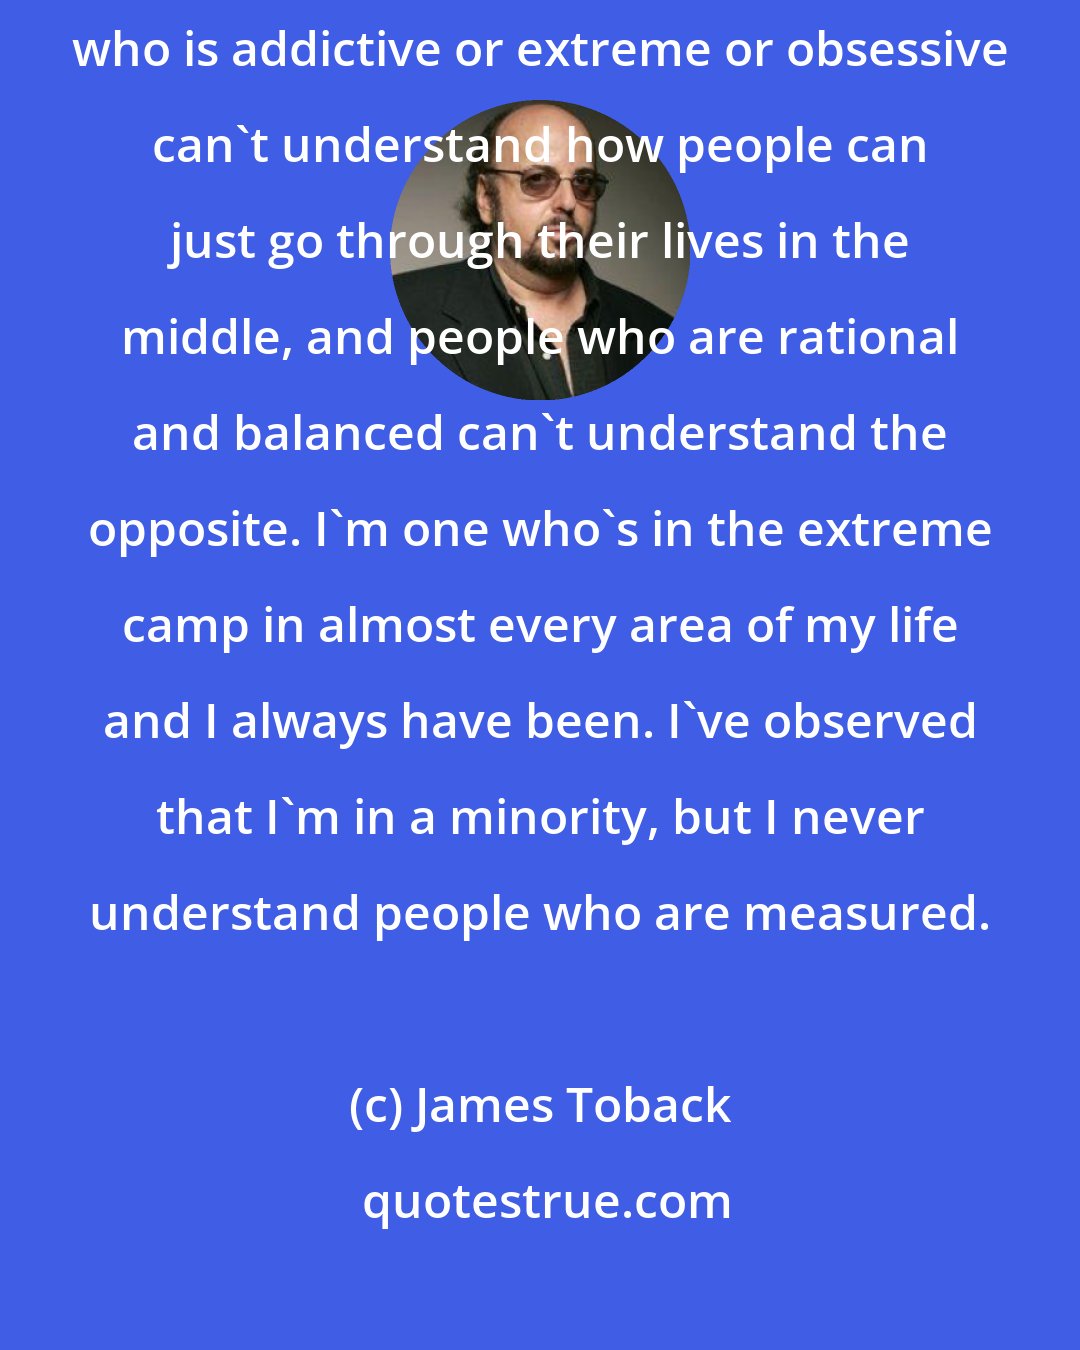 James Toback: When people are temperate in their behavior, in their lives, someone who is addictive or extreme or obsessive can't understand how people can just go through their lives in the middle, and people who are rational and balanced can't understand the opposite. I'm one who's in the extreme camp in almost every area of my life and I always have been. I've observed that I'm in a minority, but I never understand people who are measured.